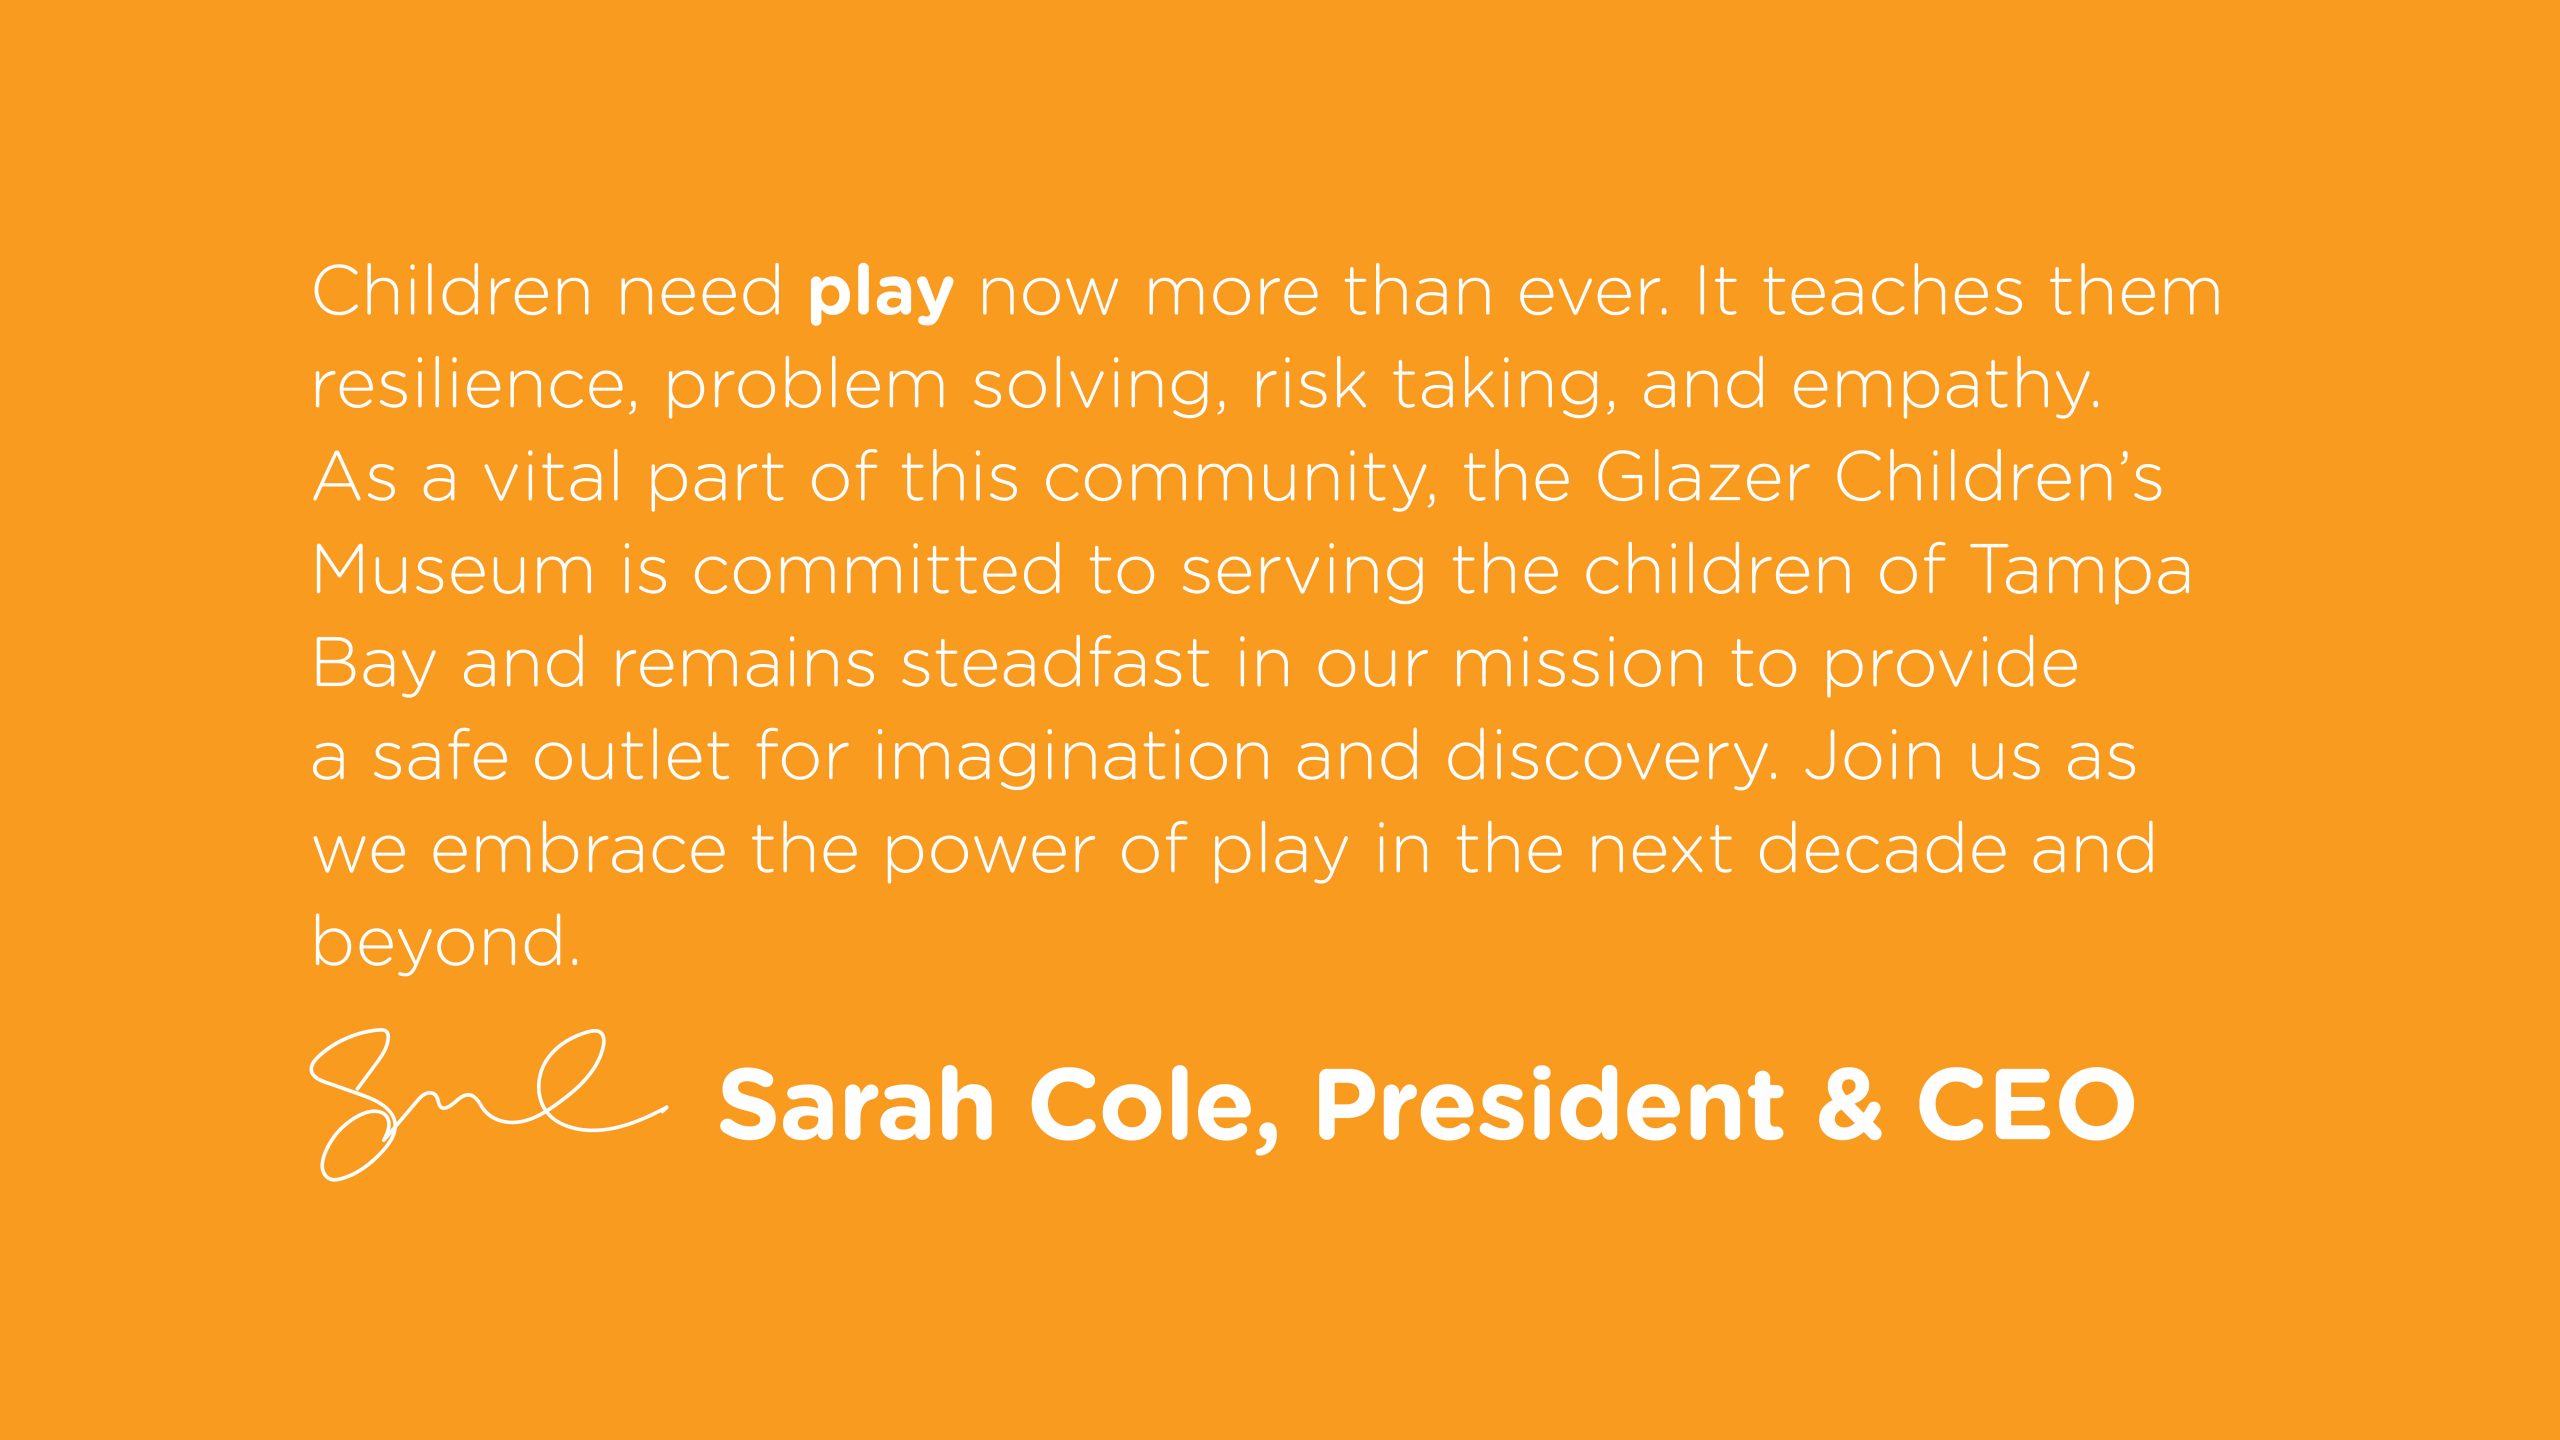 A quote from the President and CEO of the Glazer CHildren's Museum, Sarah Cole. "Children nee play now more than ever. It teaches them resilience, problem solving, risk taking, and empathy."